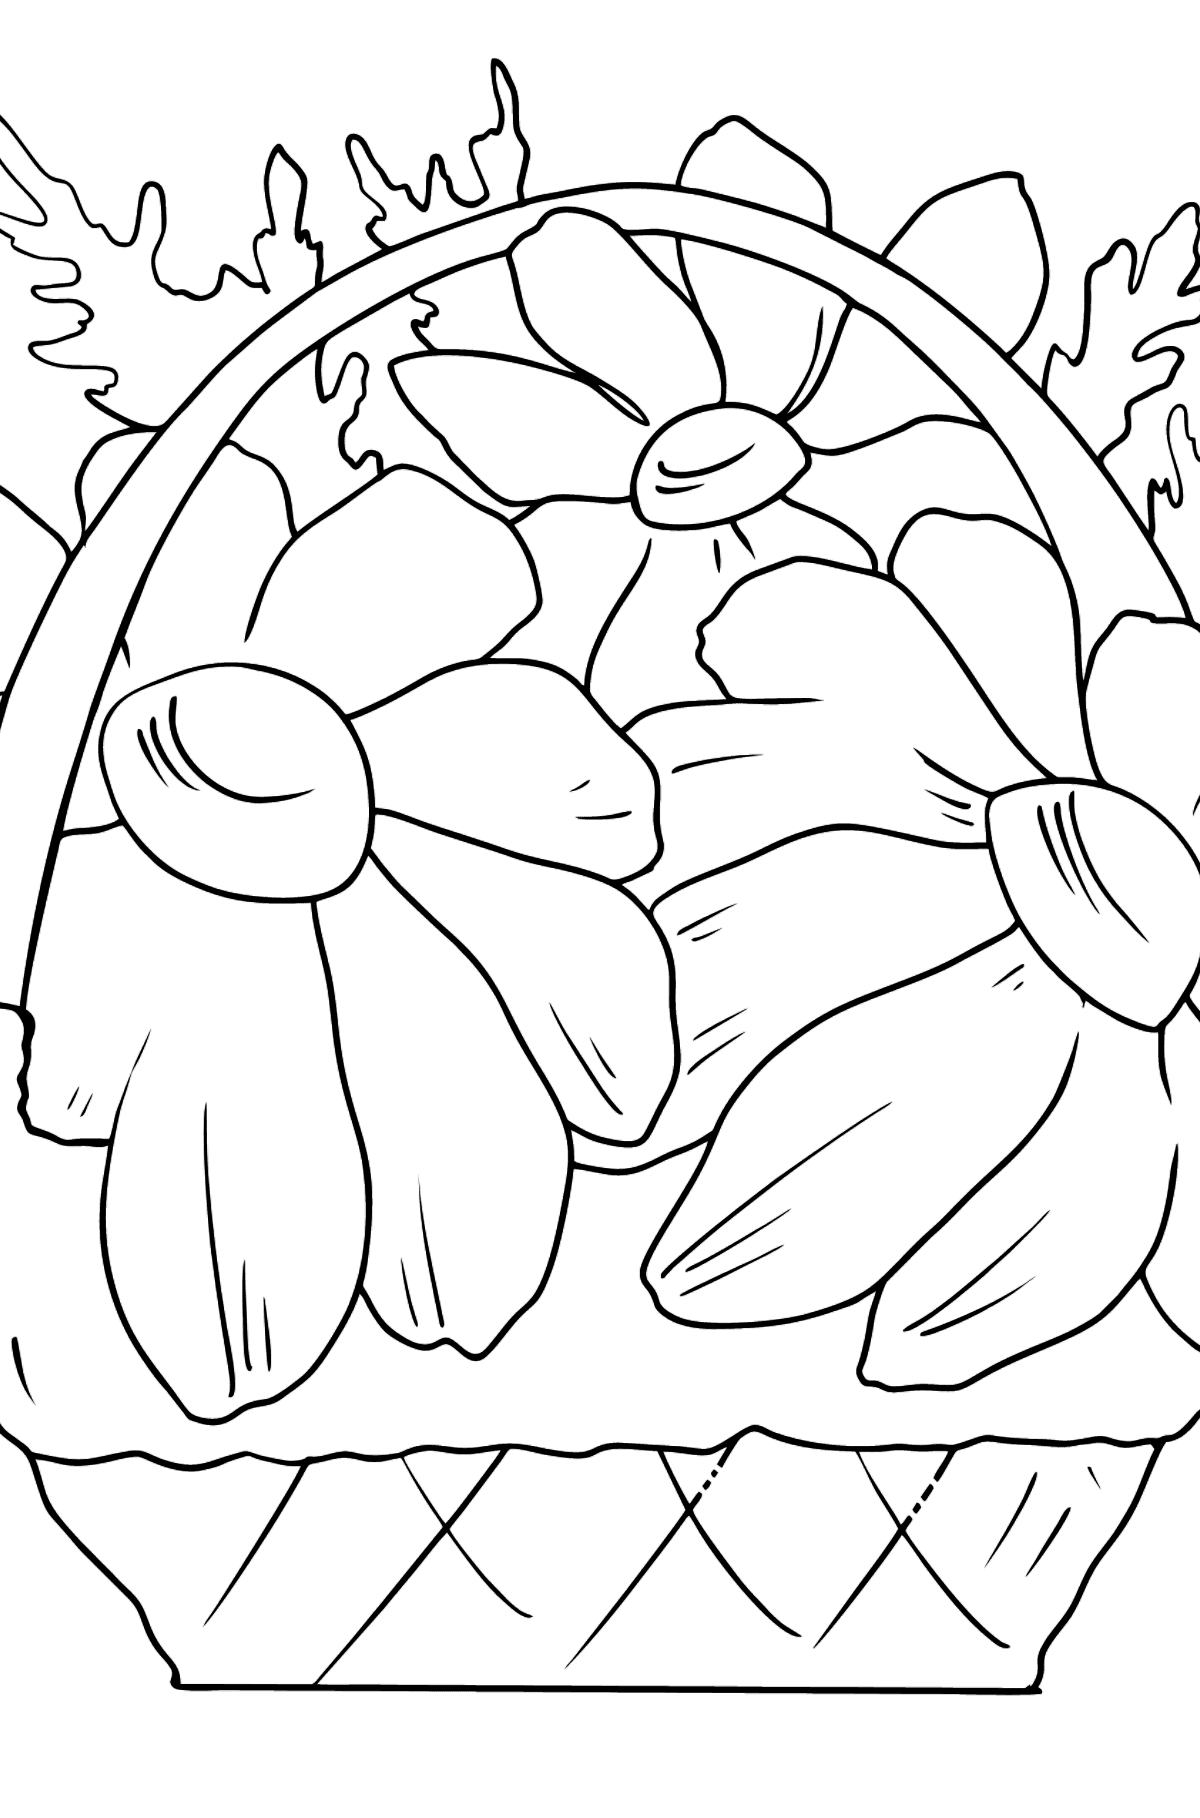 Flower Coloring Page - flowers in a basket - Coloring Pages for Kids